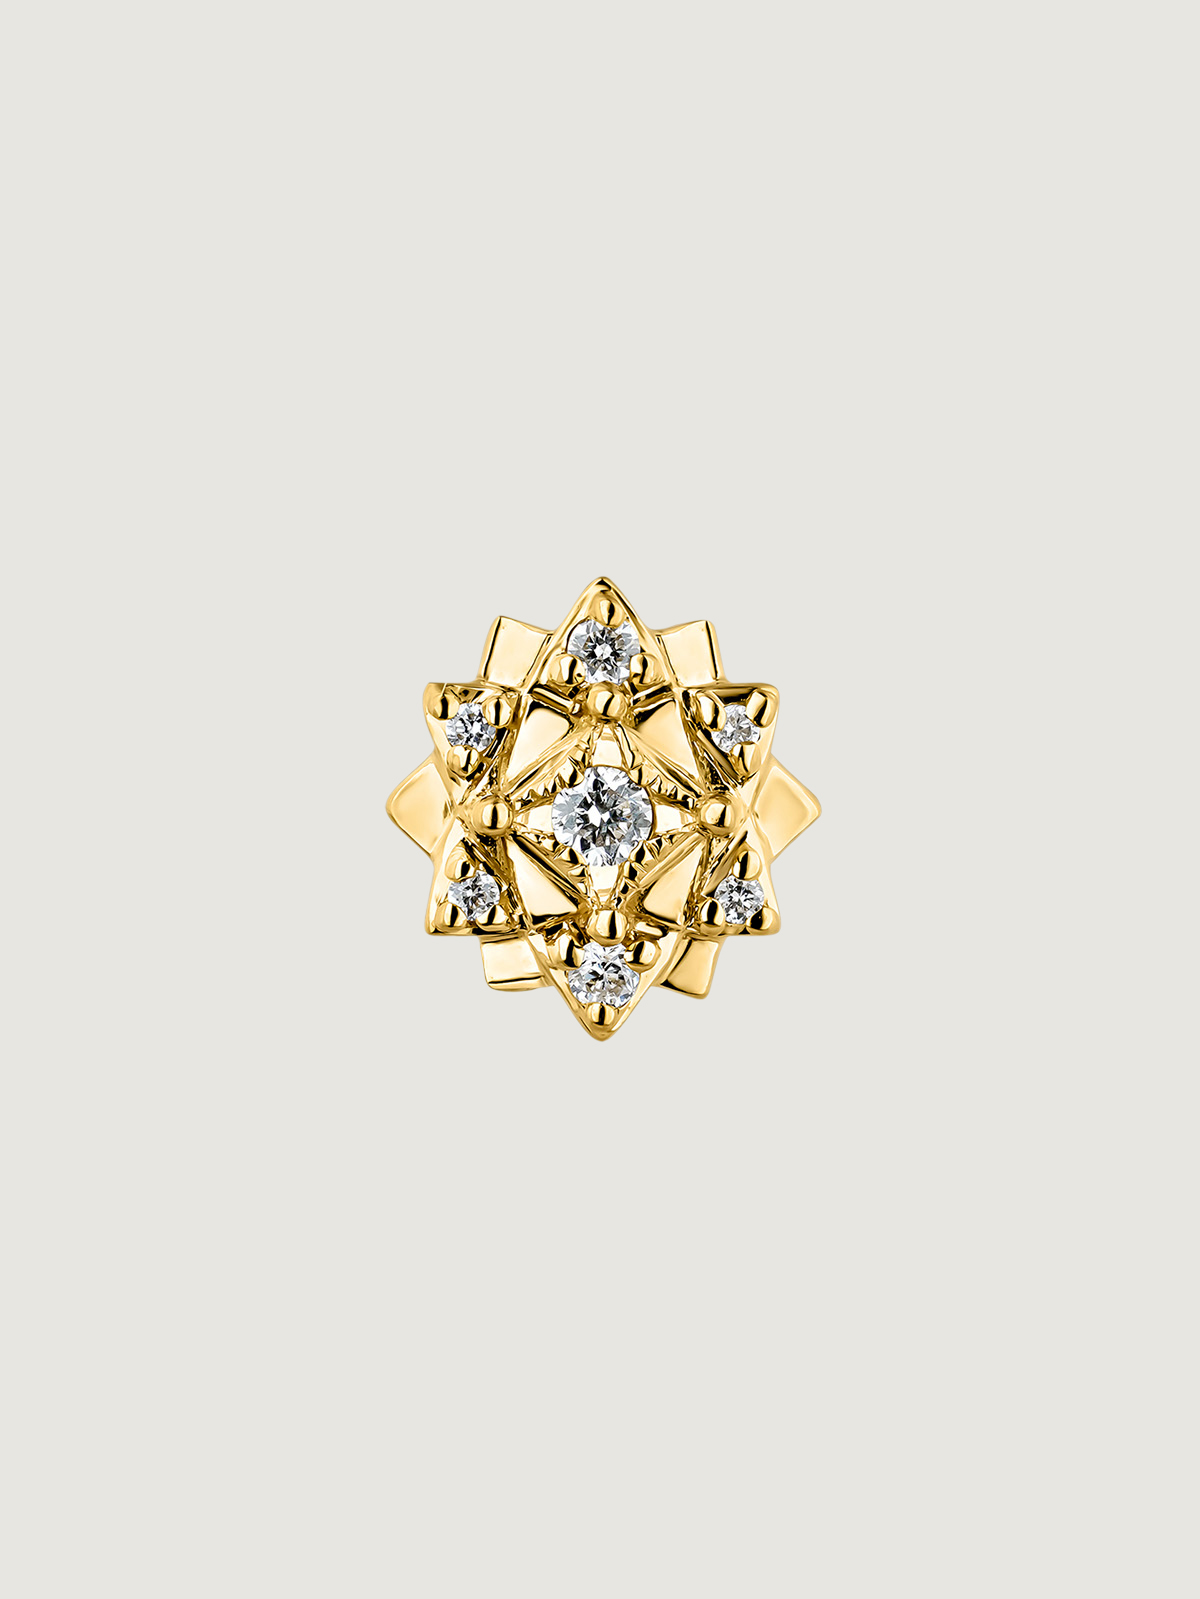 Individual 9K yellow gold earring with diamonds and flower.